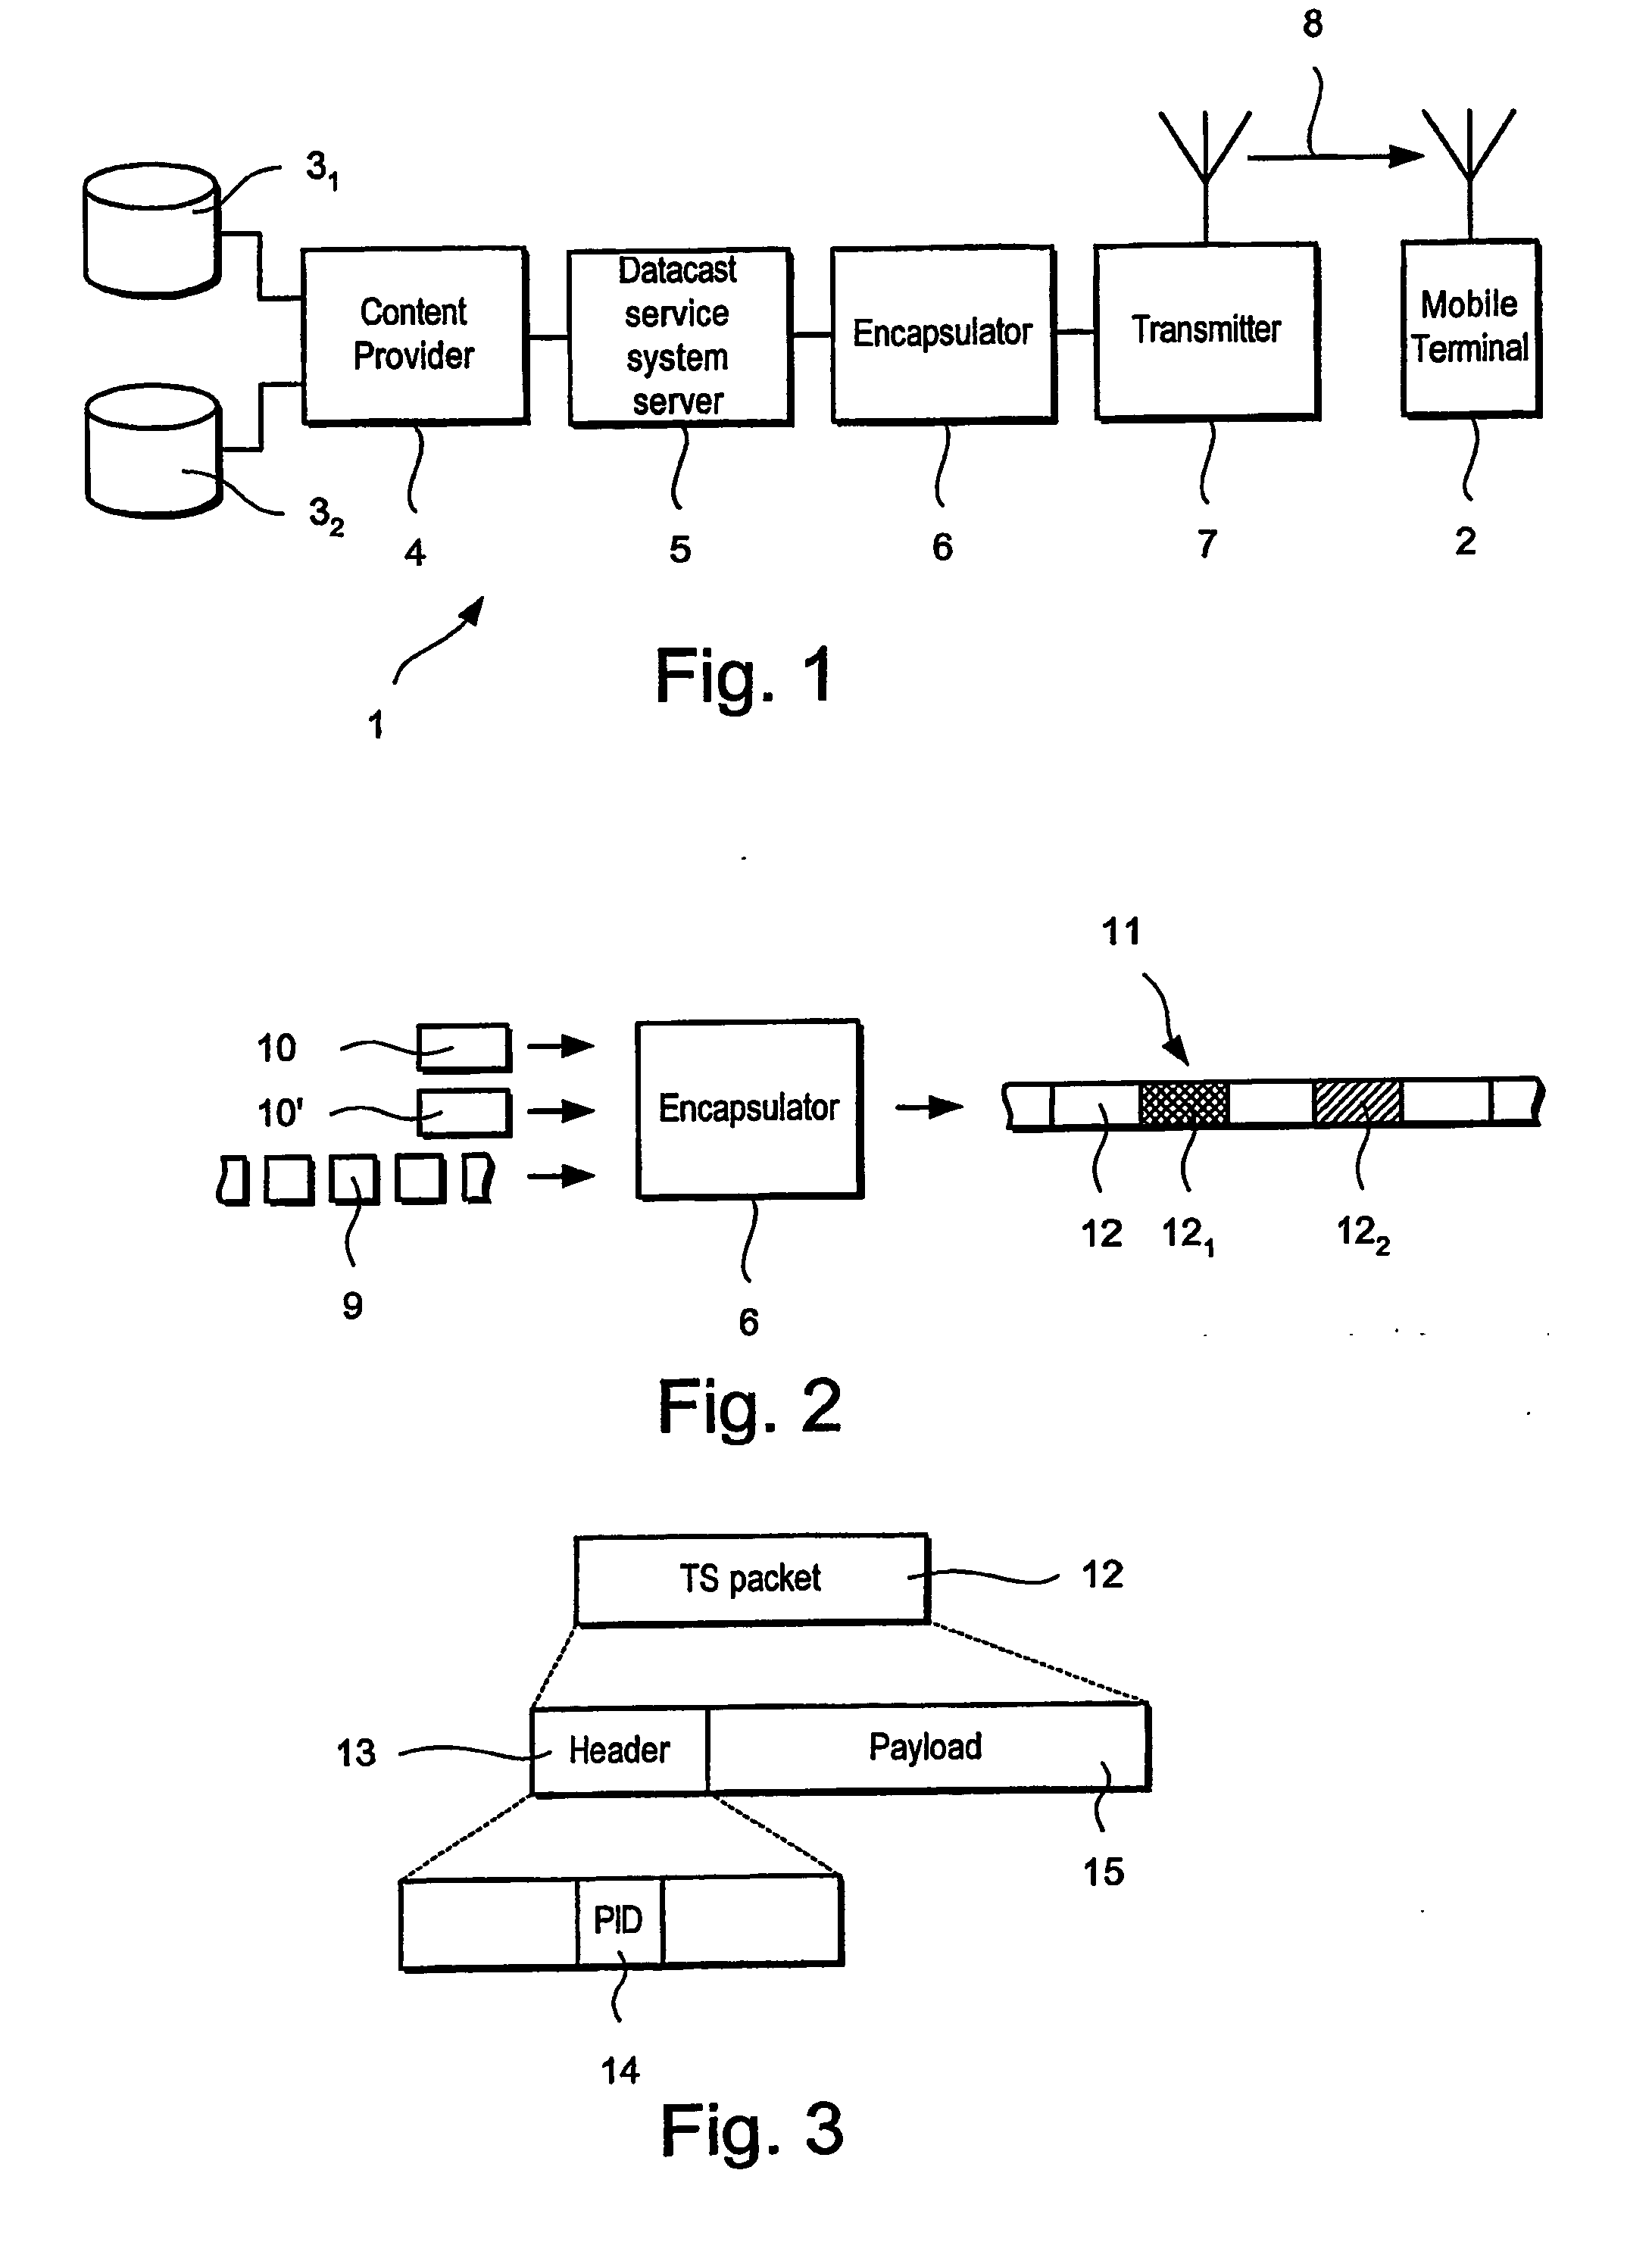 Signalling Service Information Data and Service Information Fec Data in a Communication Network